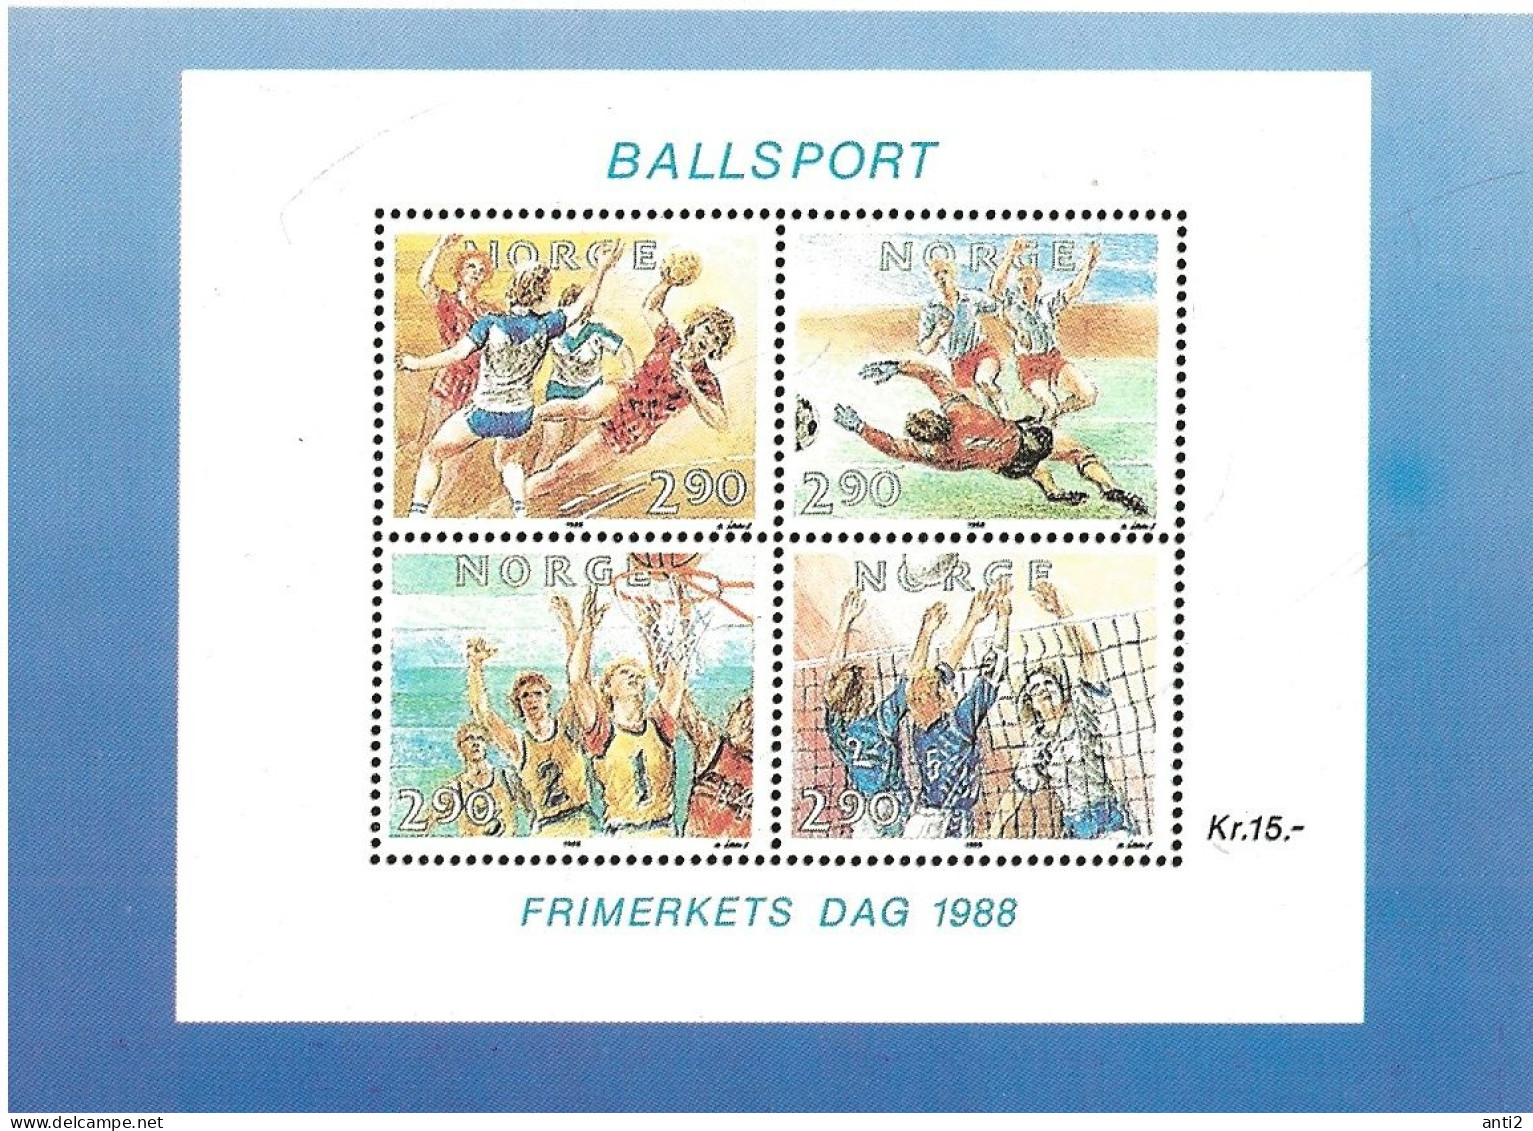 Norway 1988 Card With Imprinted Stamps Stamps Day  - Bloc Ballsports,  Maximum Card  Unused - Briefe U. Dokumente